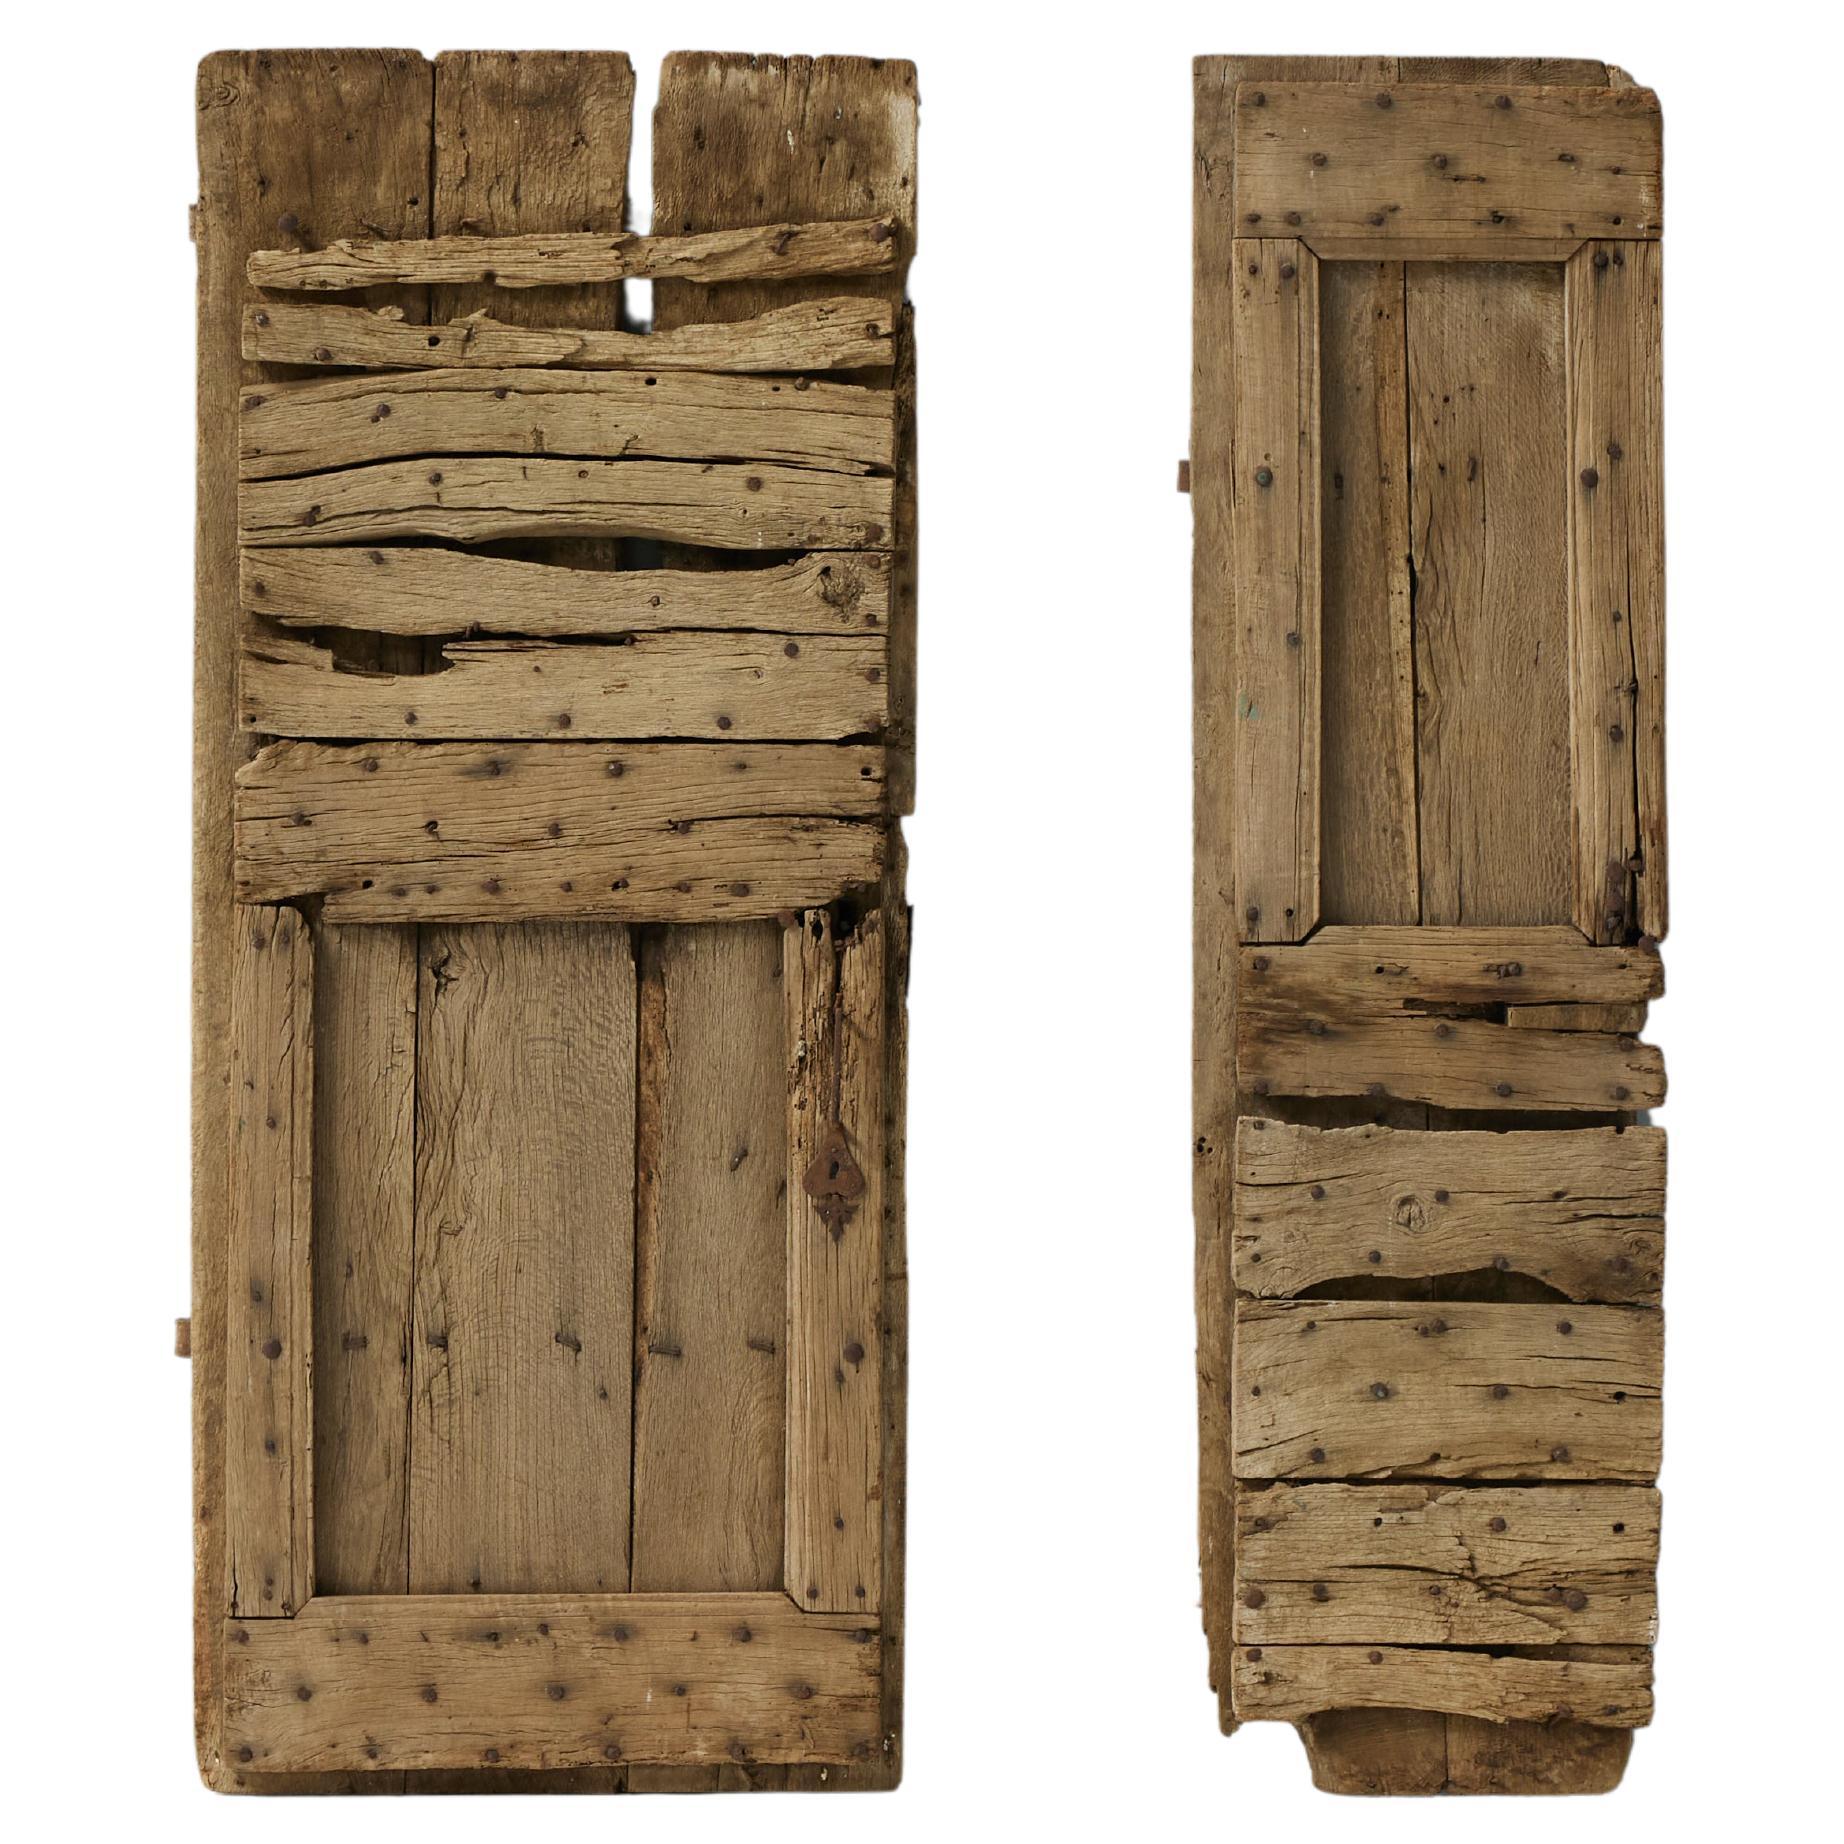 Rustic Art Populaire Doors, France, 18th Century For Sale